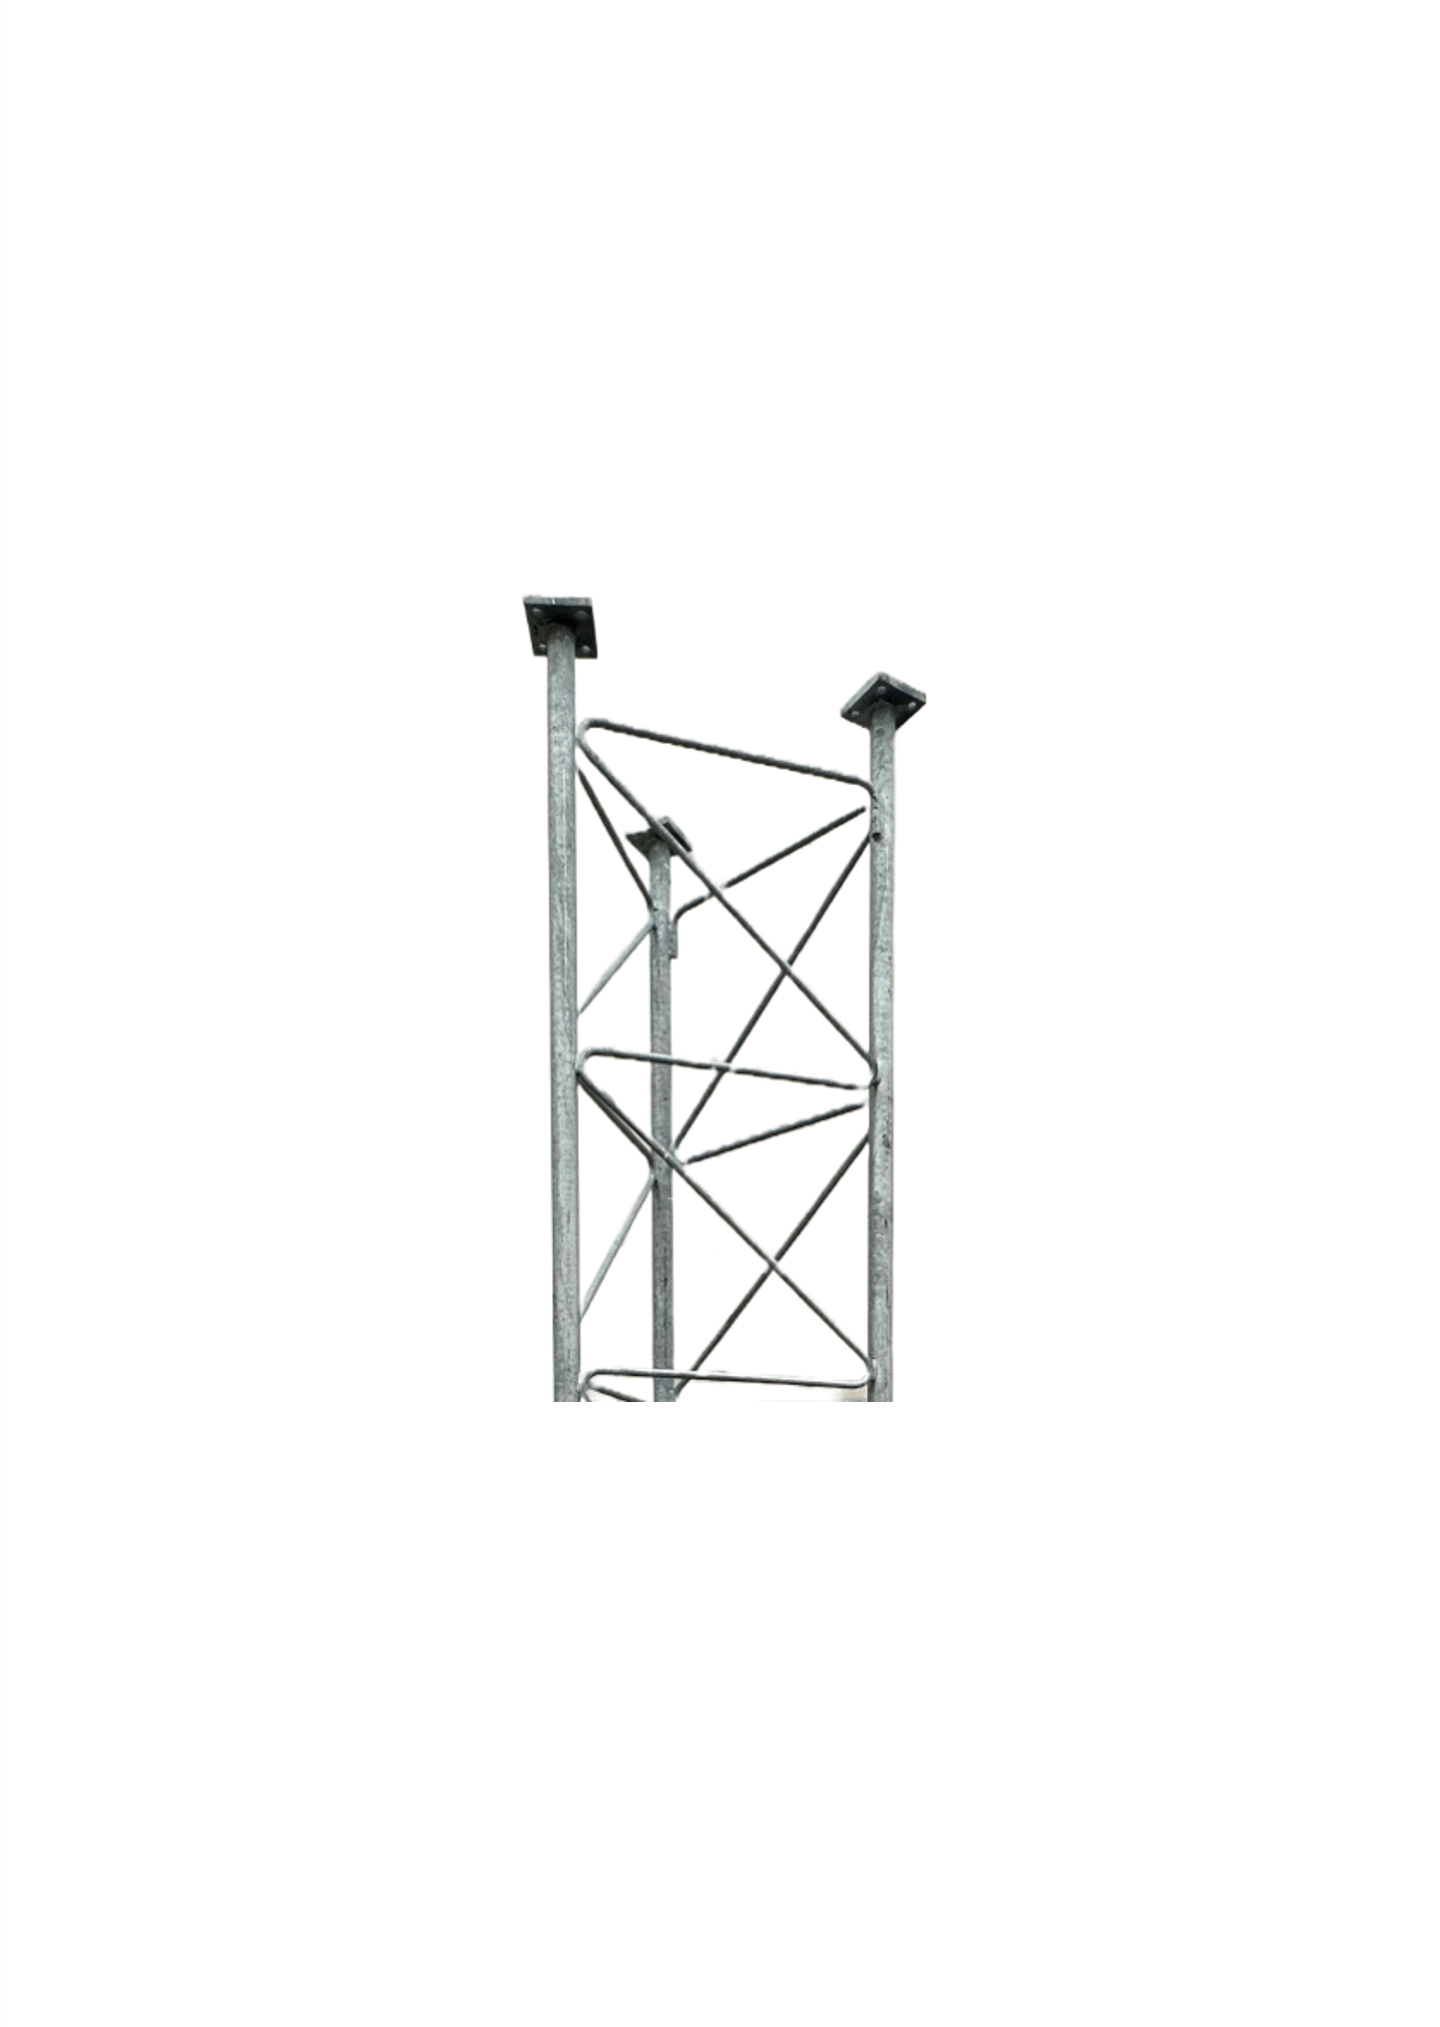 Amerite 65 Series 5 foot Tower Base Section